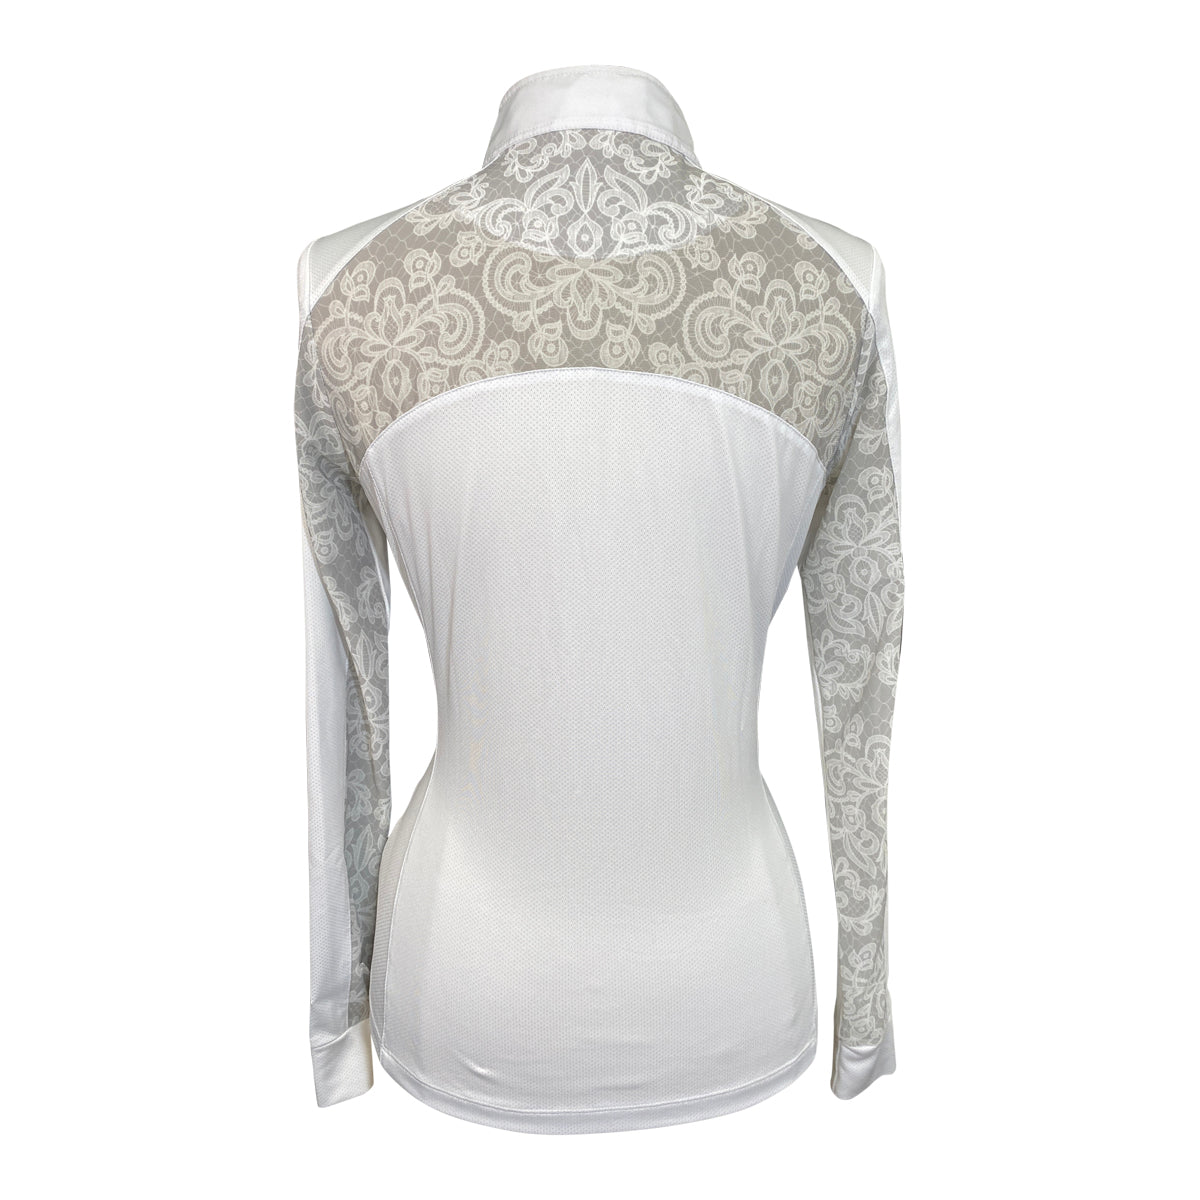 Romfh 'Lindsay' Chill Factor Show Shirt in White/Grey Paisley 